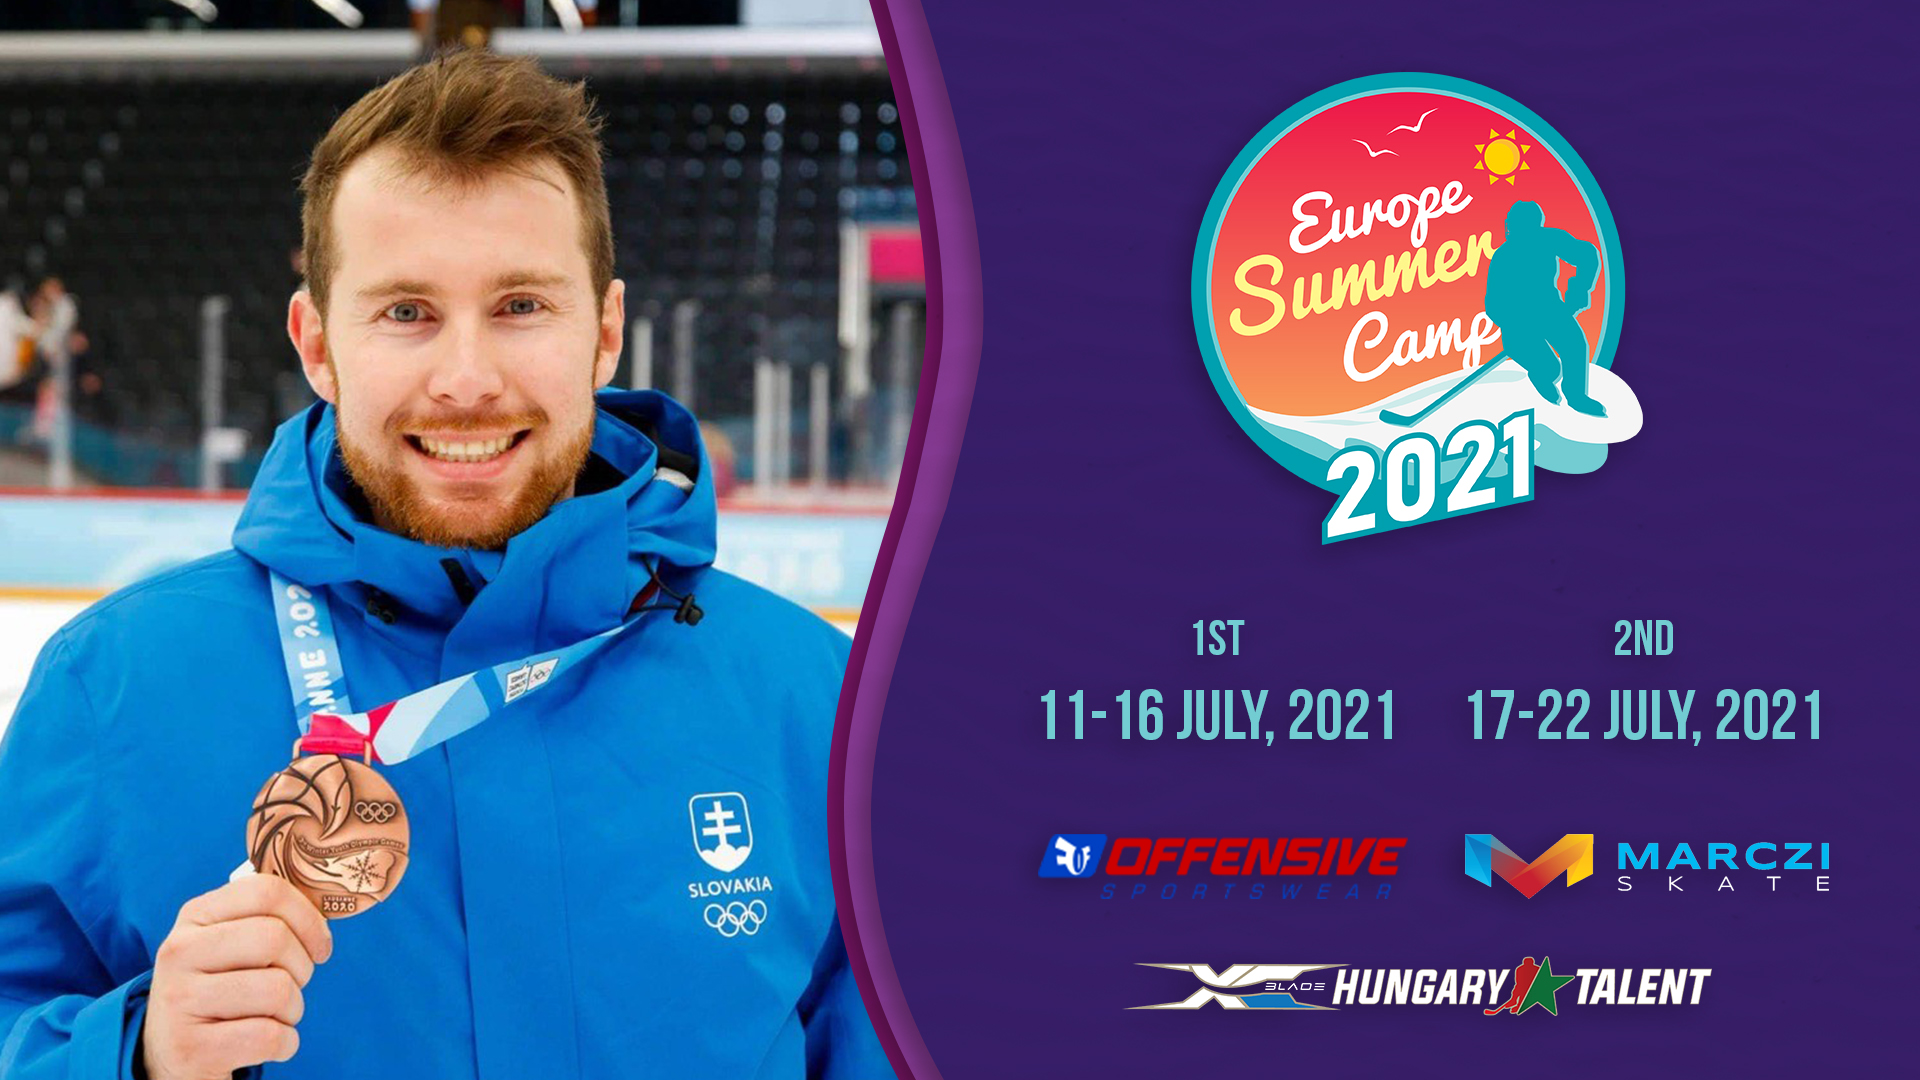 Interview with Tomas Segin, coach of the Europe Summer Camp